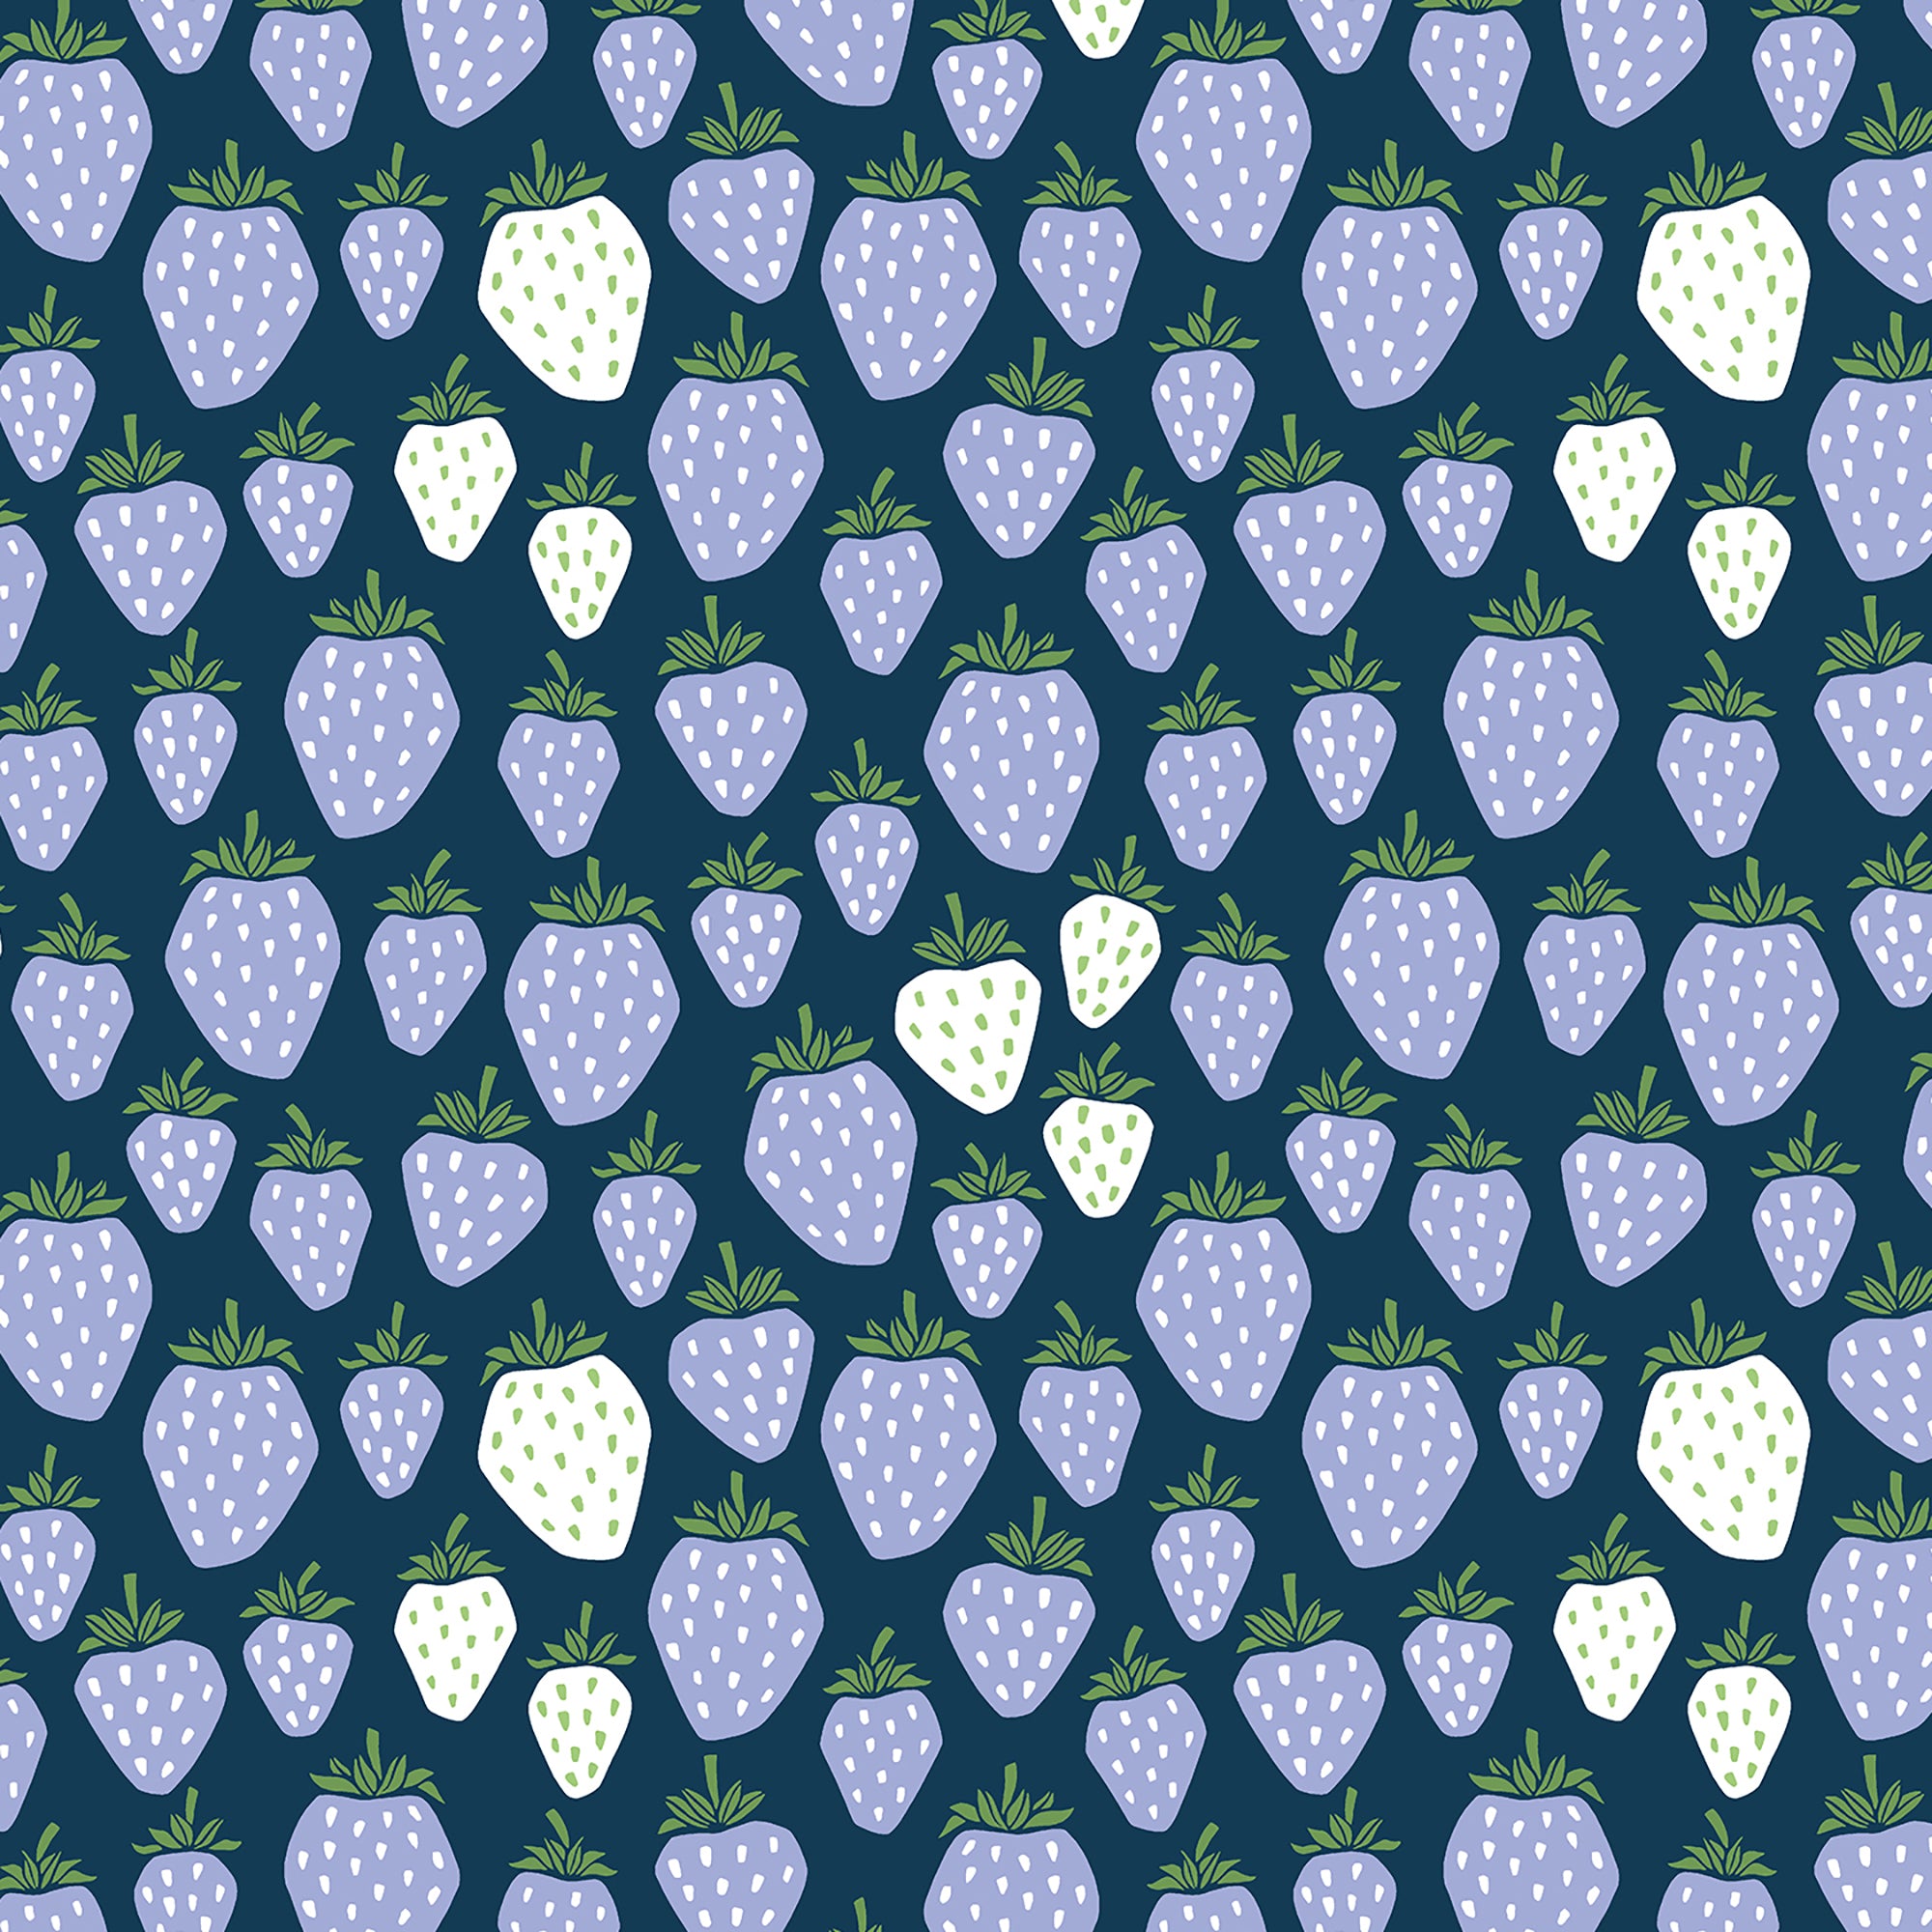 Under the Apple Tree - Queen of Berries California Blue Fabric